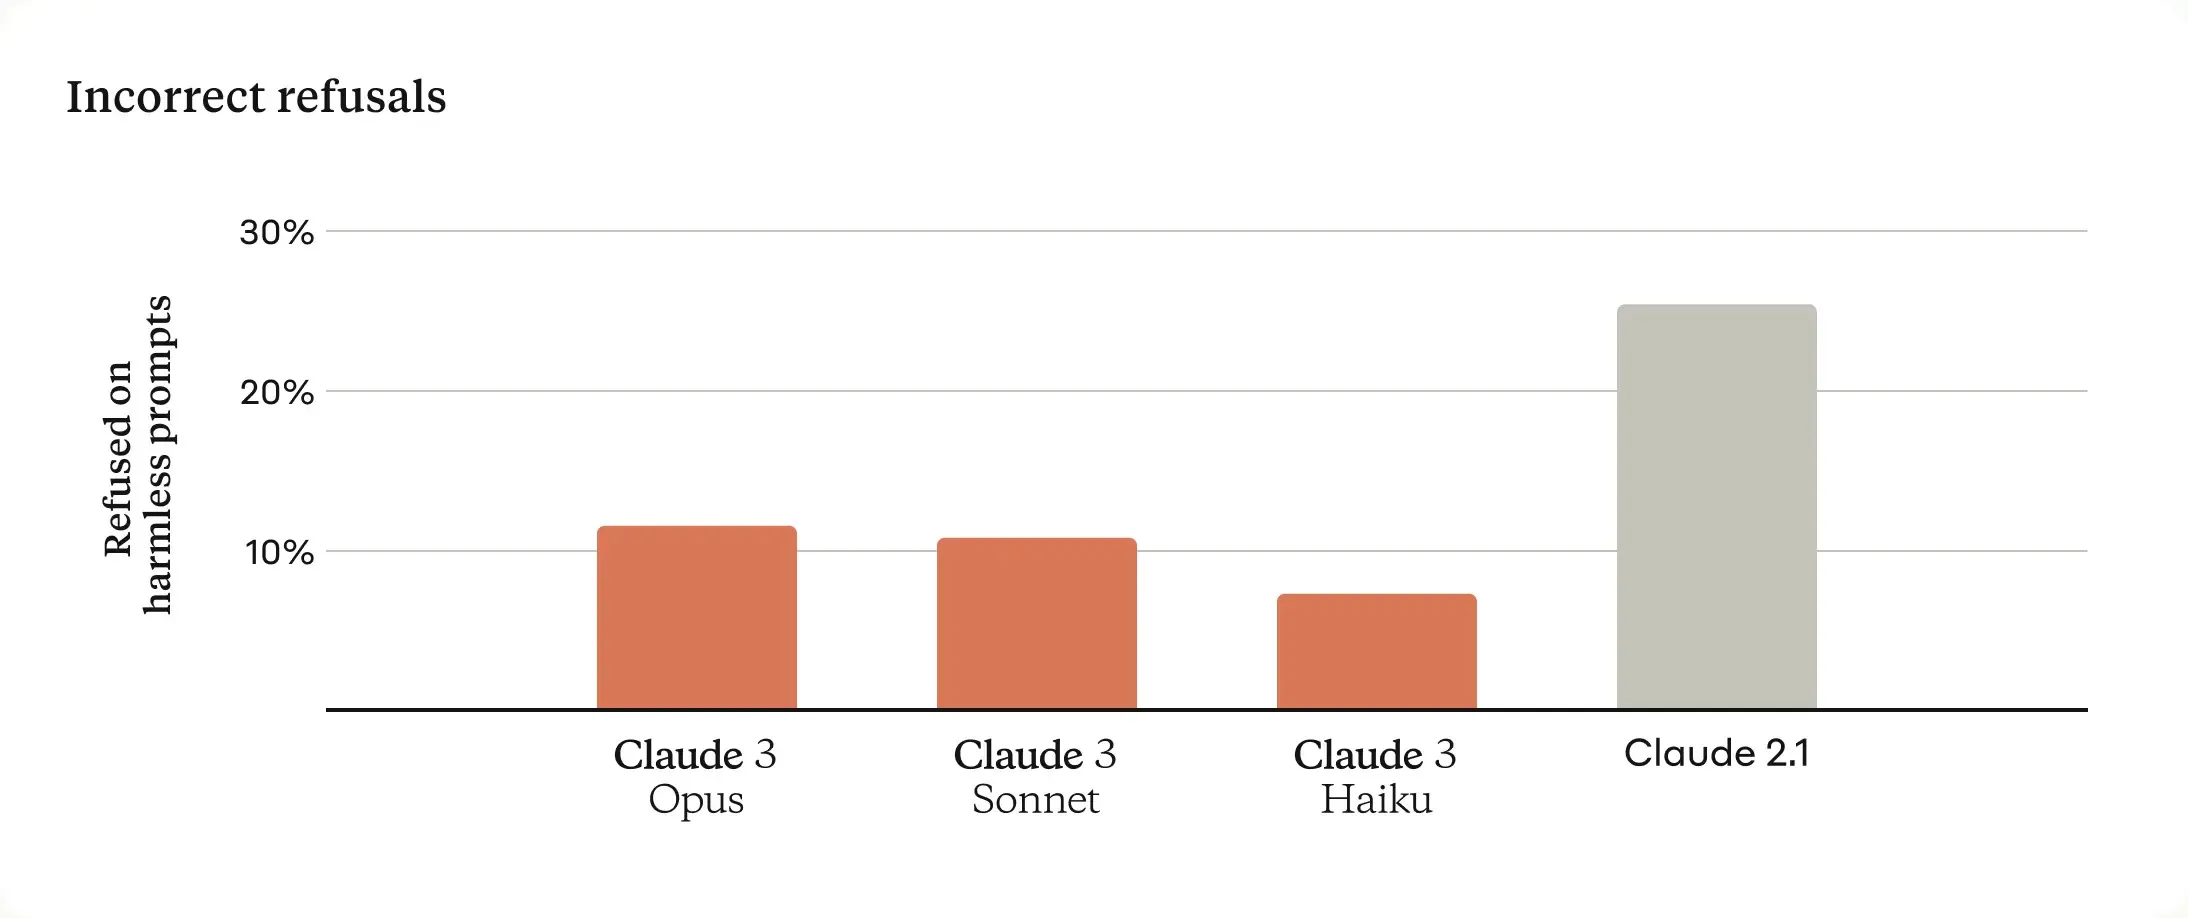 Compared to Claude 2.1, the Claude 3 models refuse to dispense much less frequently.